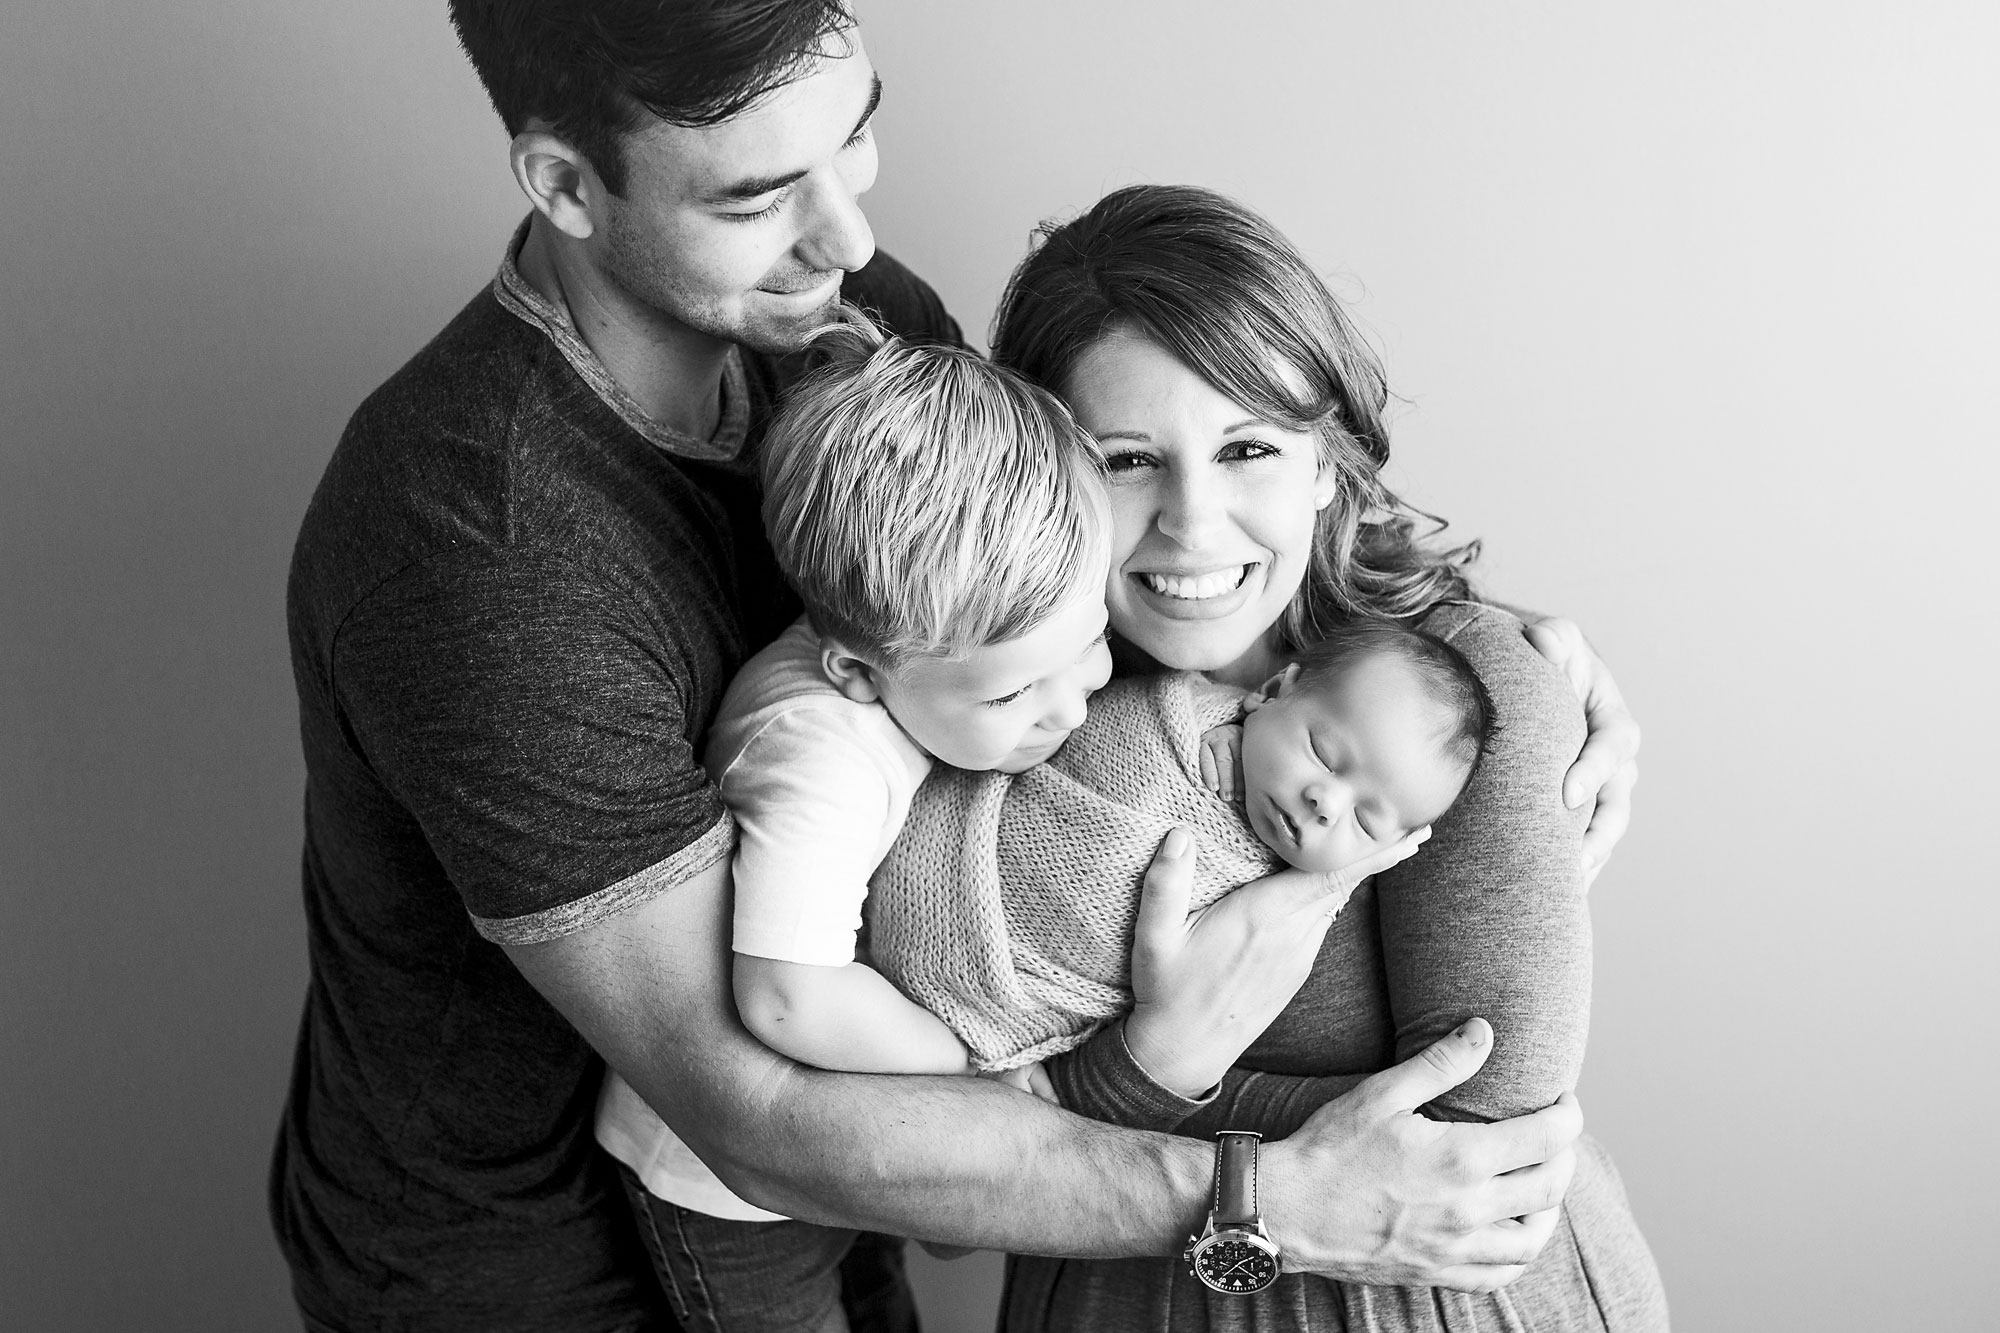 newborn and family photographer nj, black and white of parents big brother and newborn baby